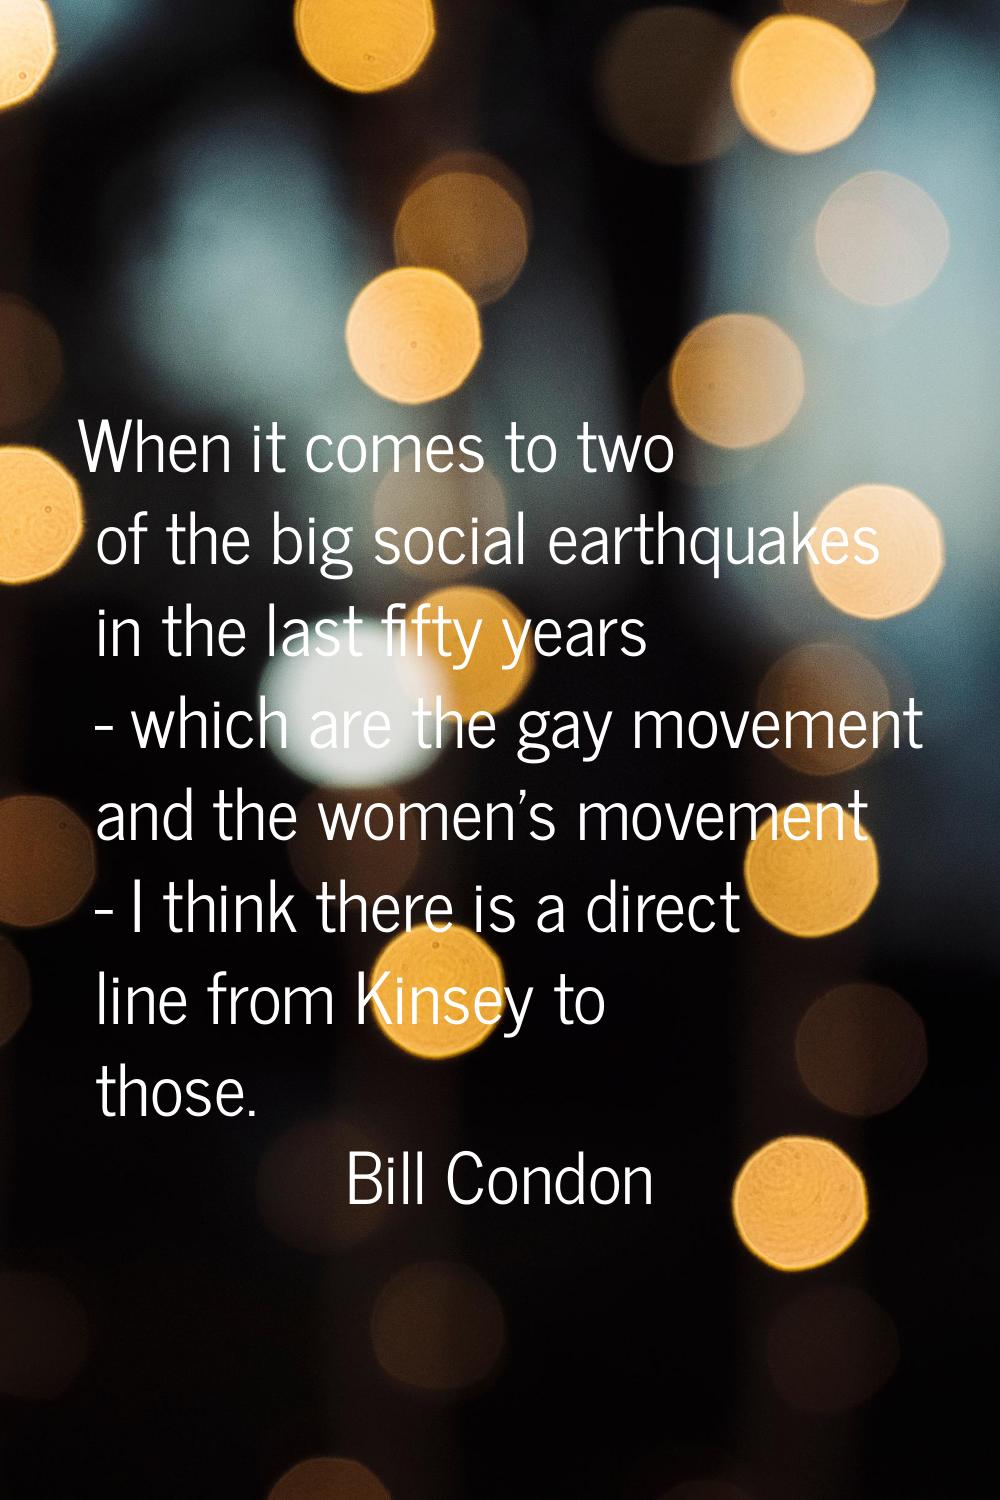 When it comes to two of the big social earthquakes in the last fifty years - which are the gay move